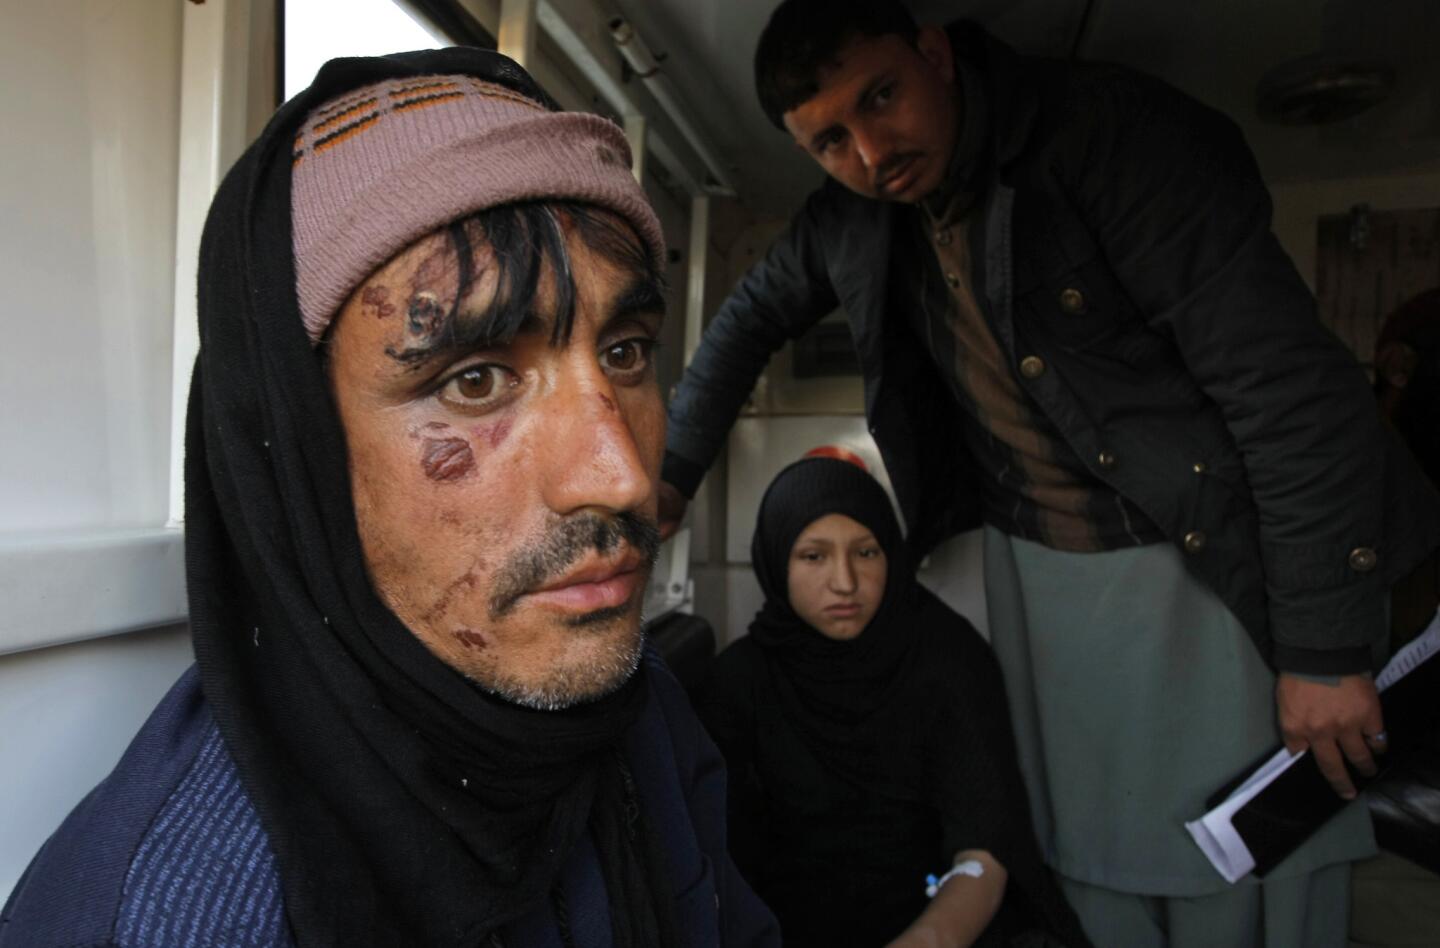 People who were injured in Monday's deadly earthquake arrive at Peshawar airbase in Pakistan, Tuesday, Oct. 27, 2015.